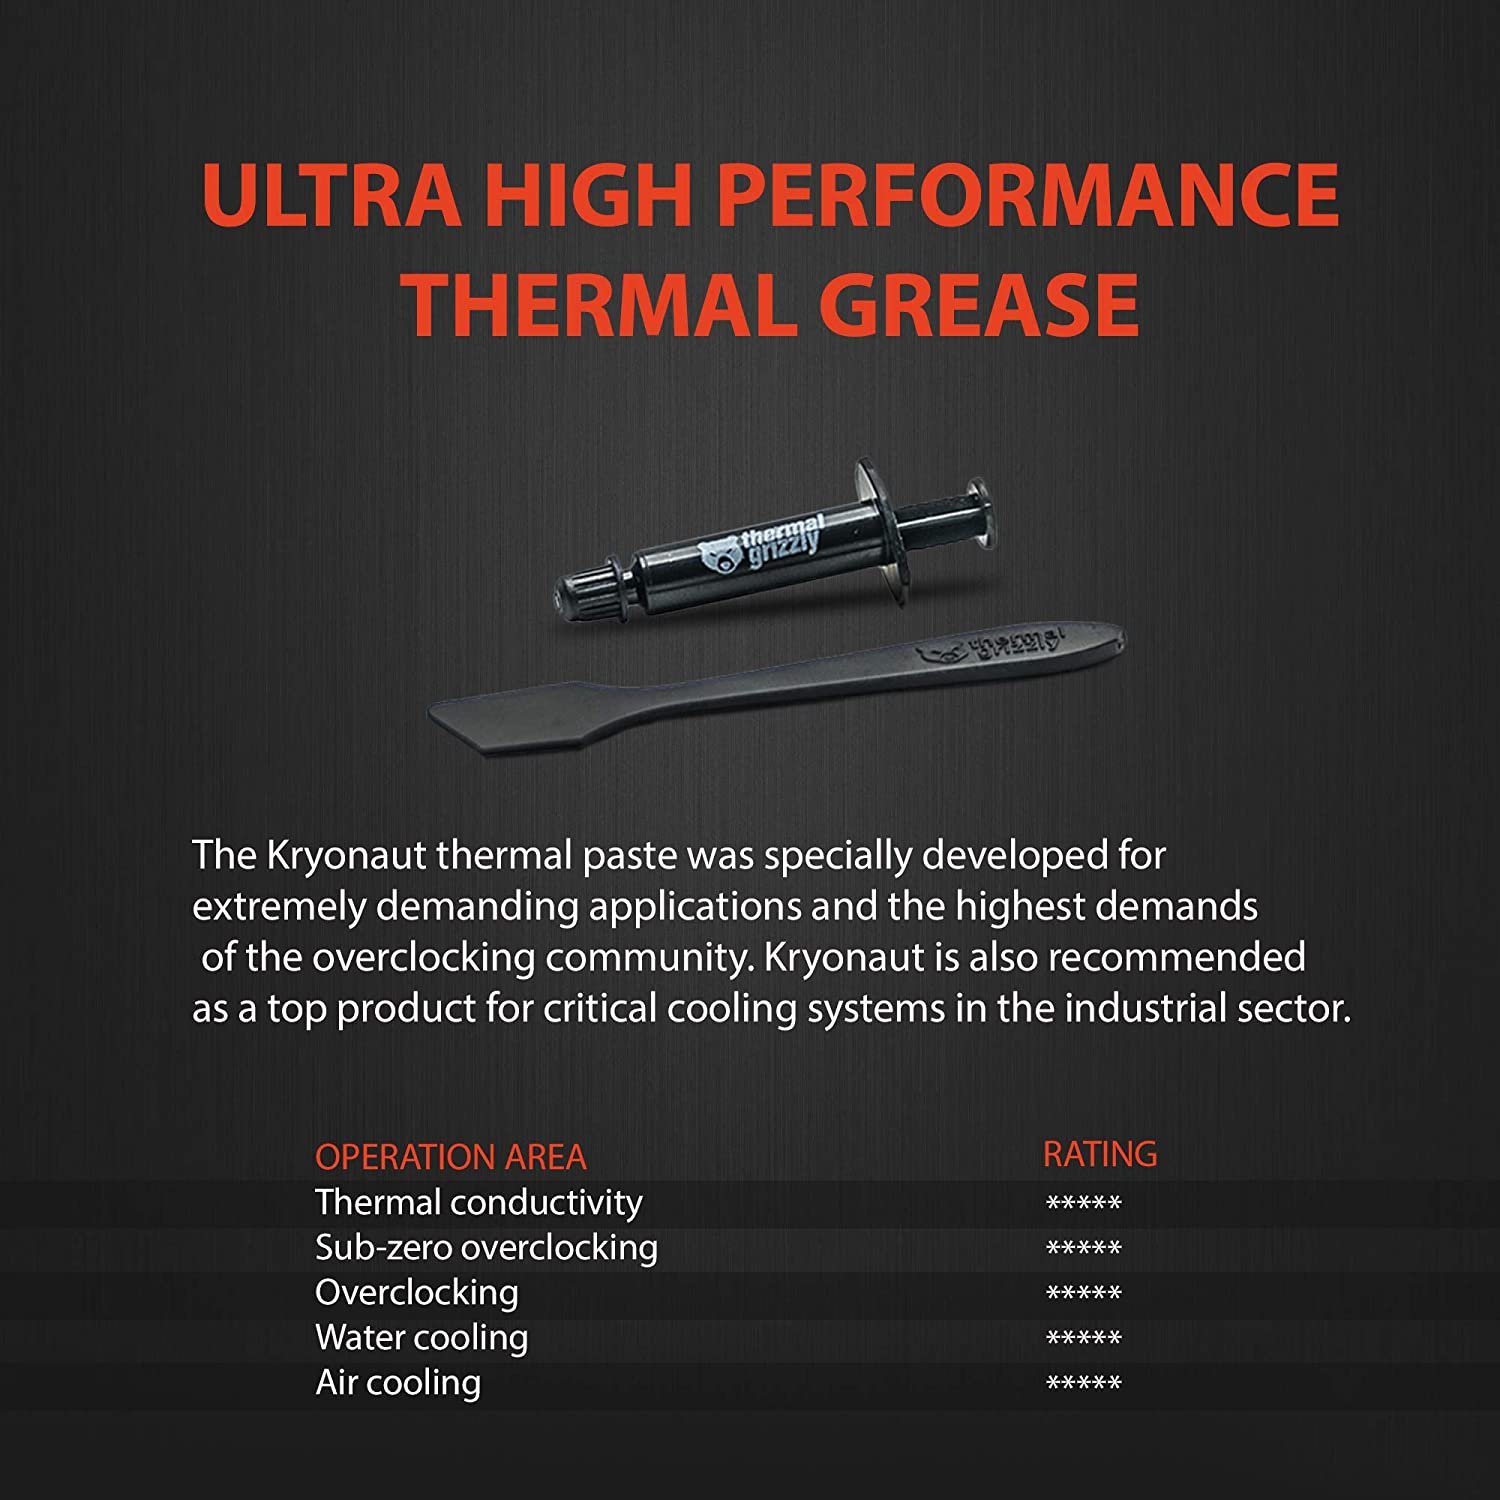 https://nabcooling.com/wp-content/uploads/2021/06/Thermal-Grizzly-Kryonaut-Thermal-Paste-1g-Feature.jpg